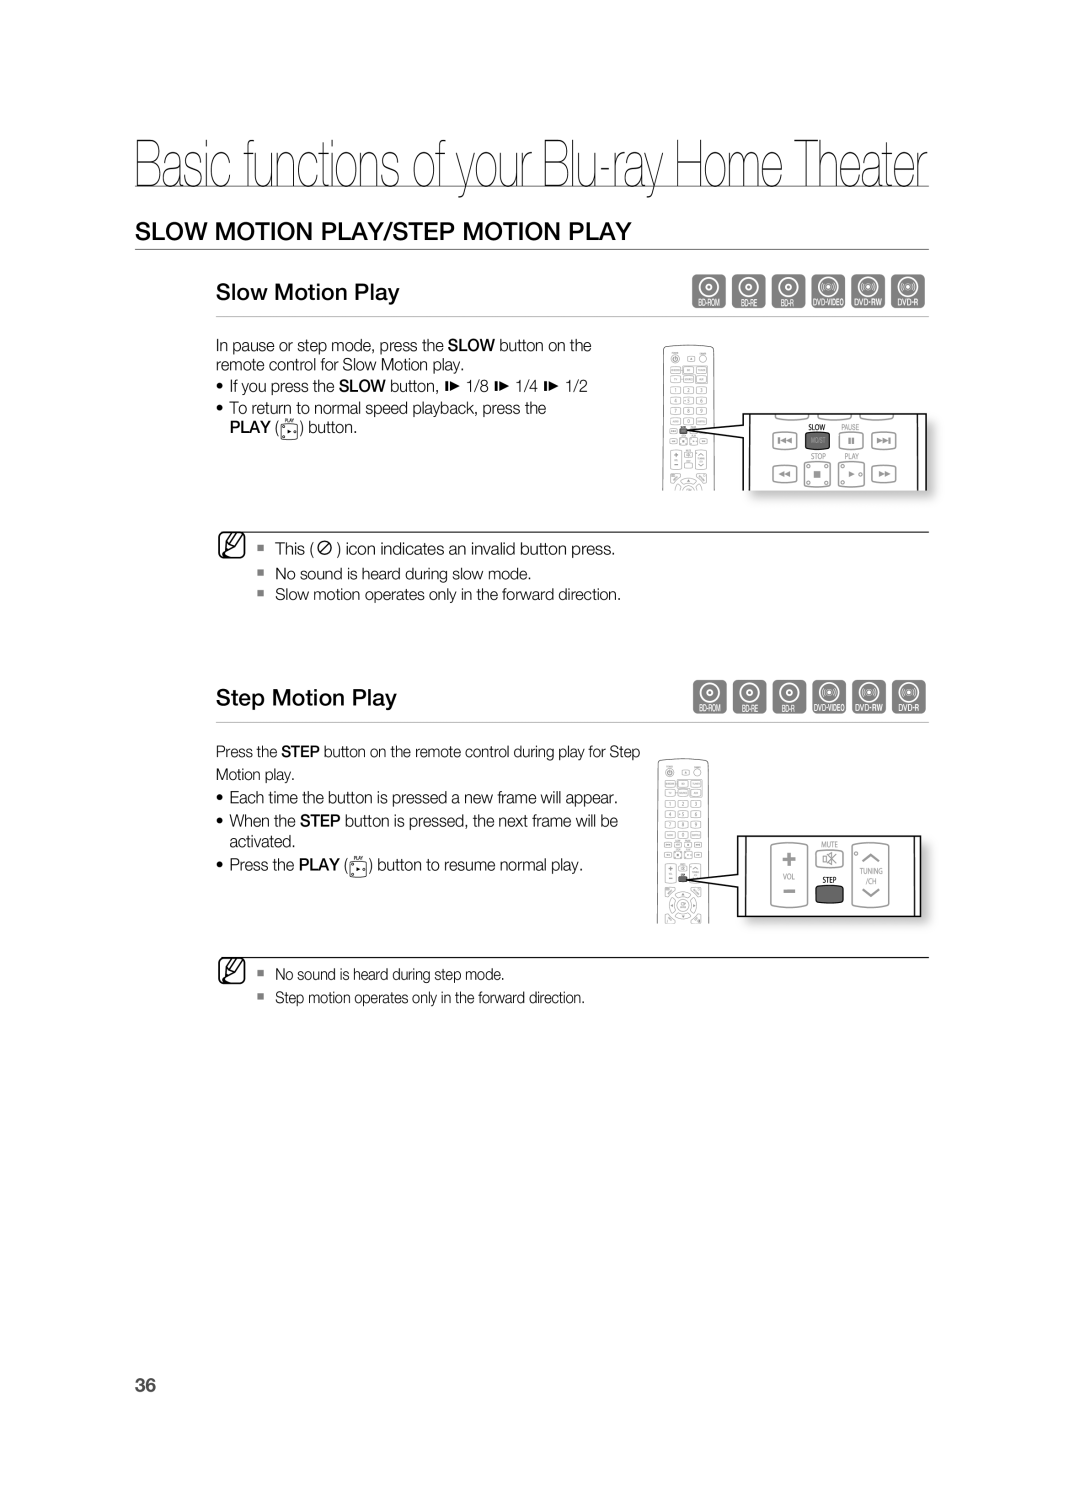 Samsung AH68-02178Z, HT-BD1200 Slow Motion Play/Step Motion Play, Basic functions of your Blu-ray Home Theater, hgfZCV 